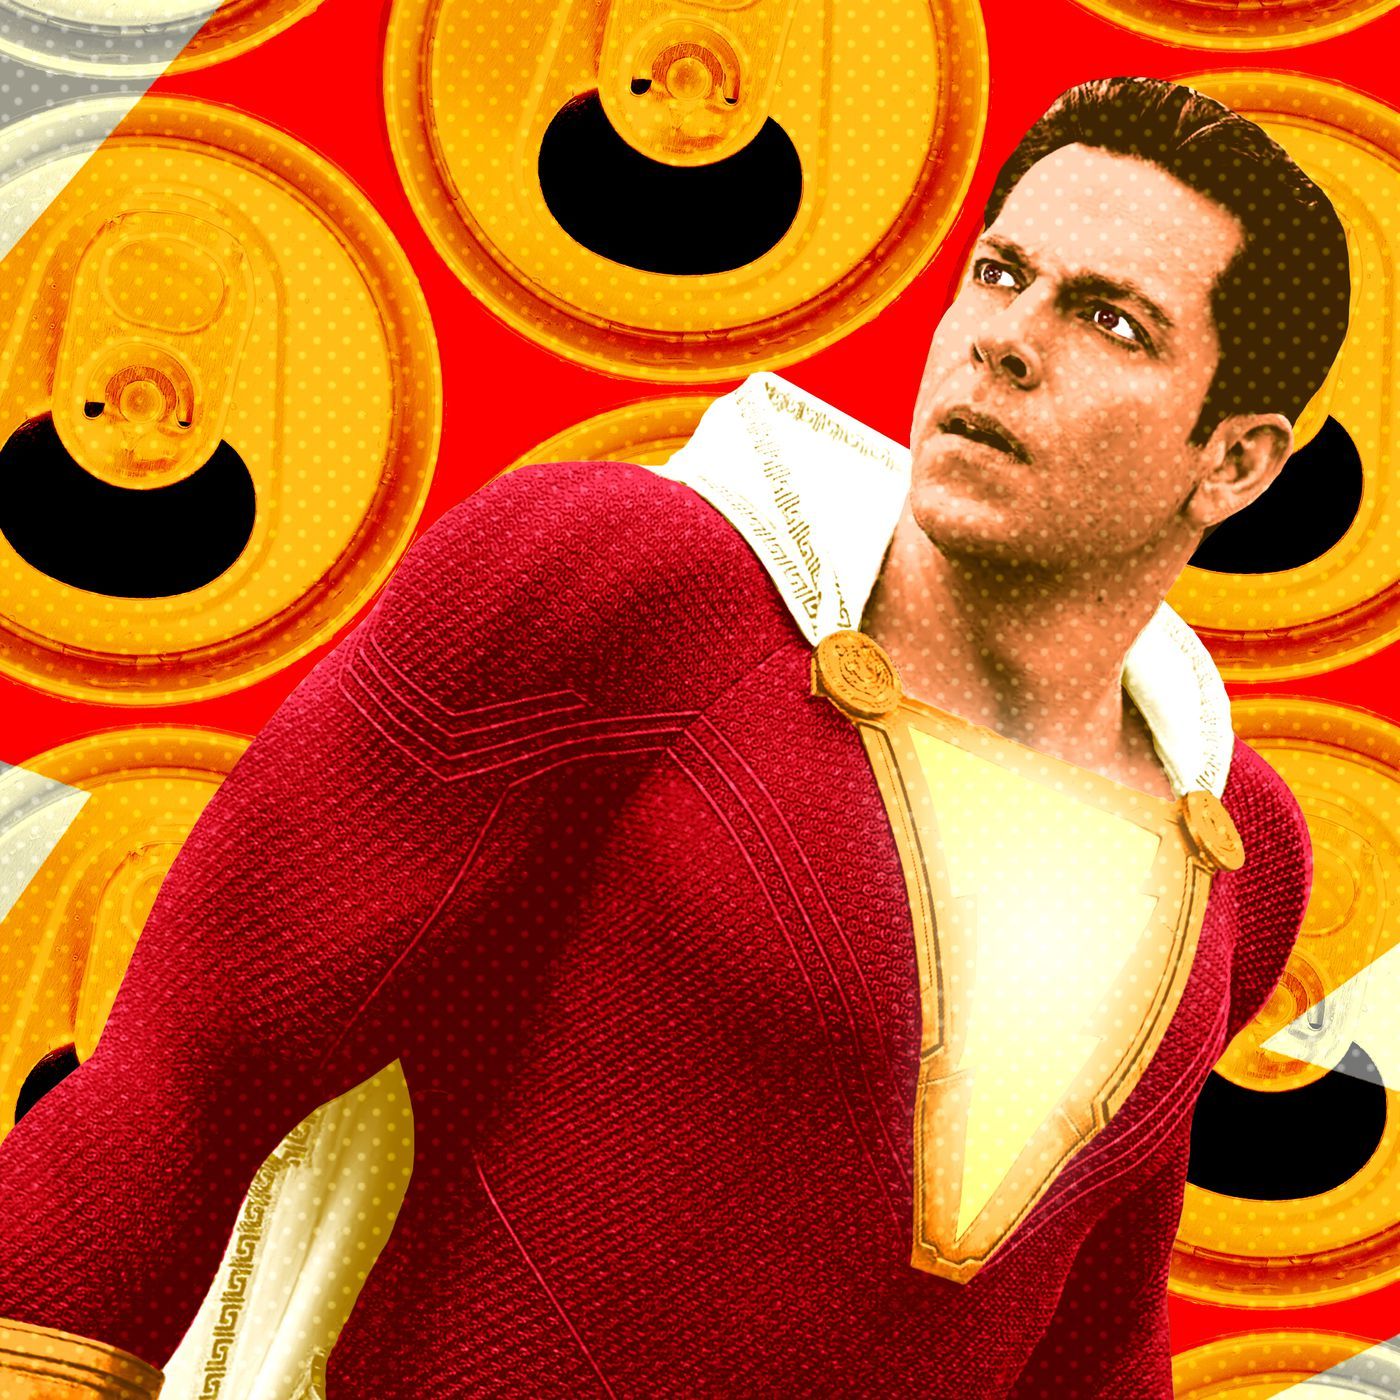 Shazam!': The DC Extended Universe Isn't a Universe at All